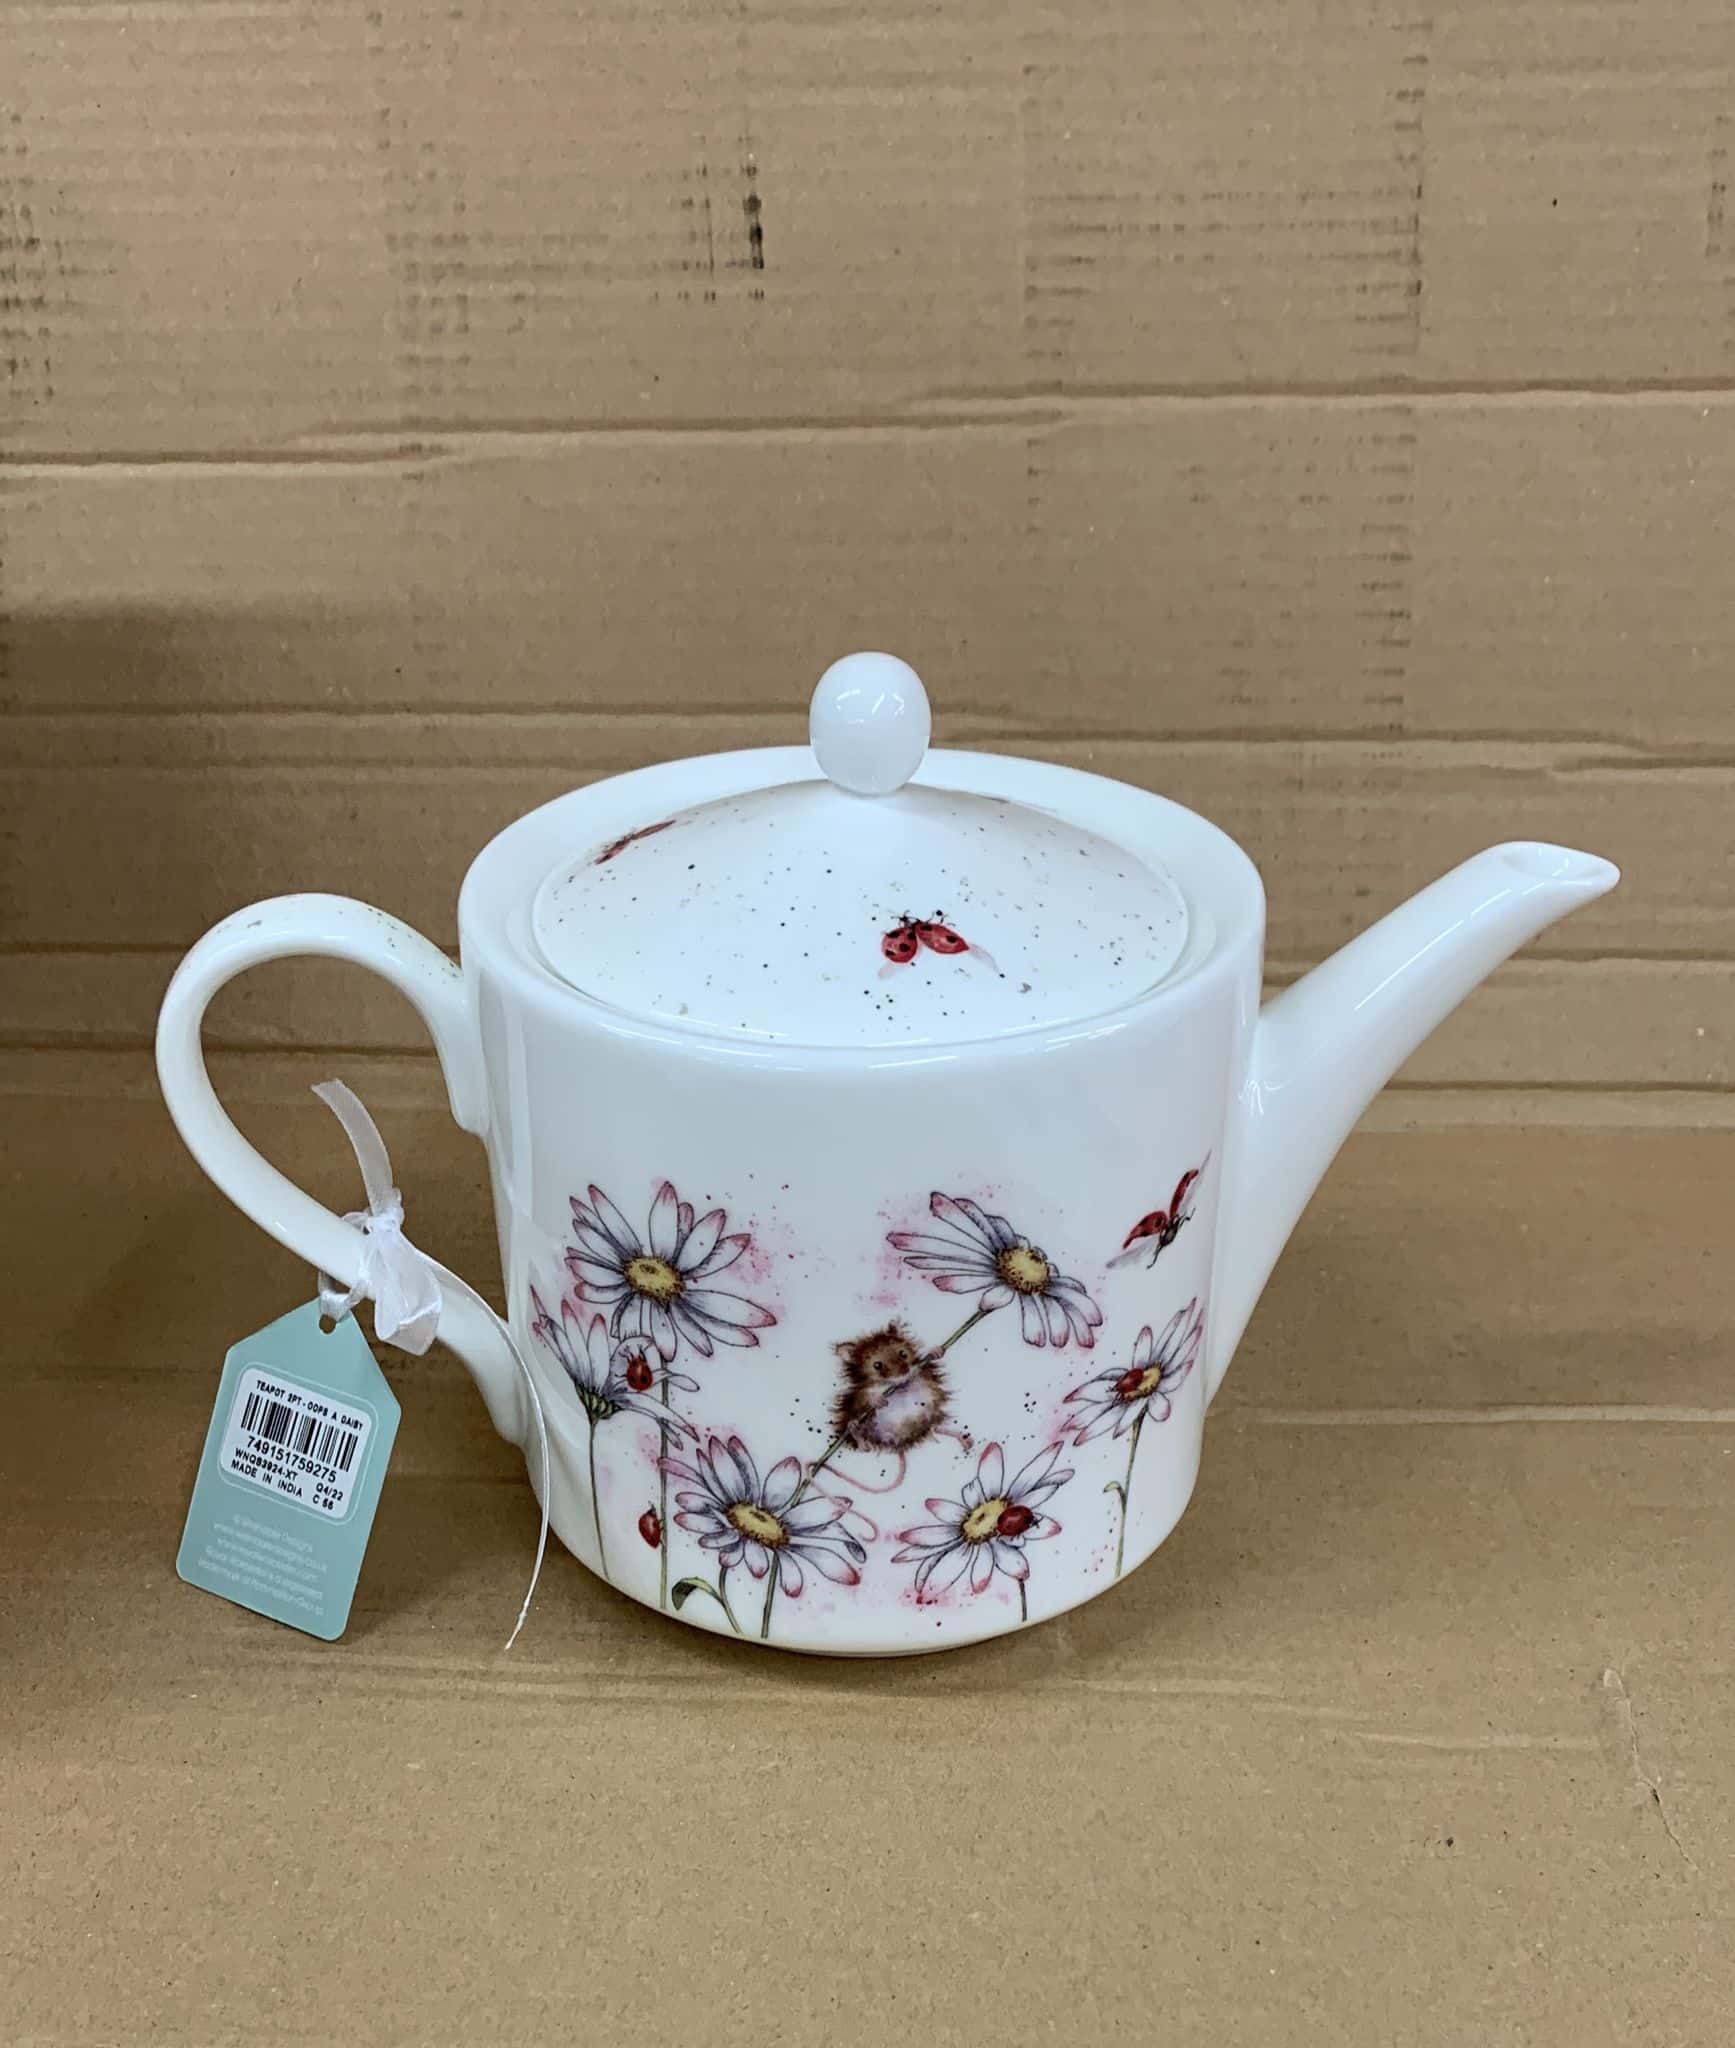 Wrendale Designs - 'Oops A Daisy' Teapot-9275